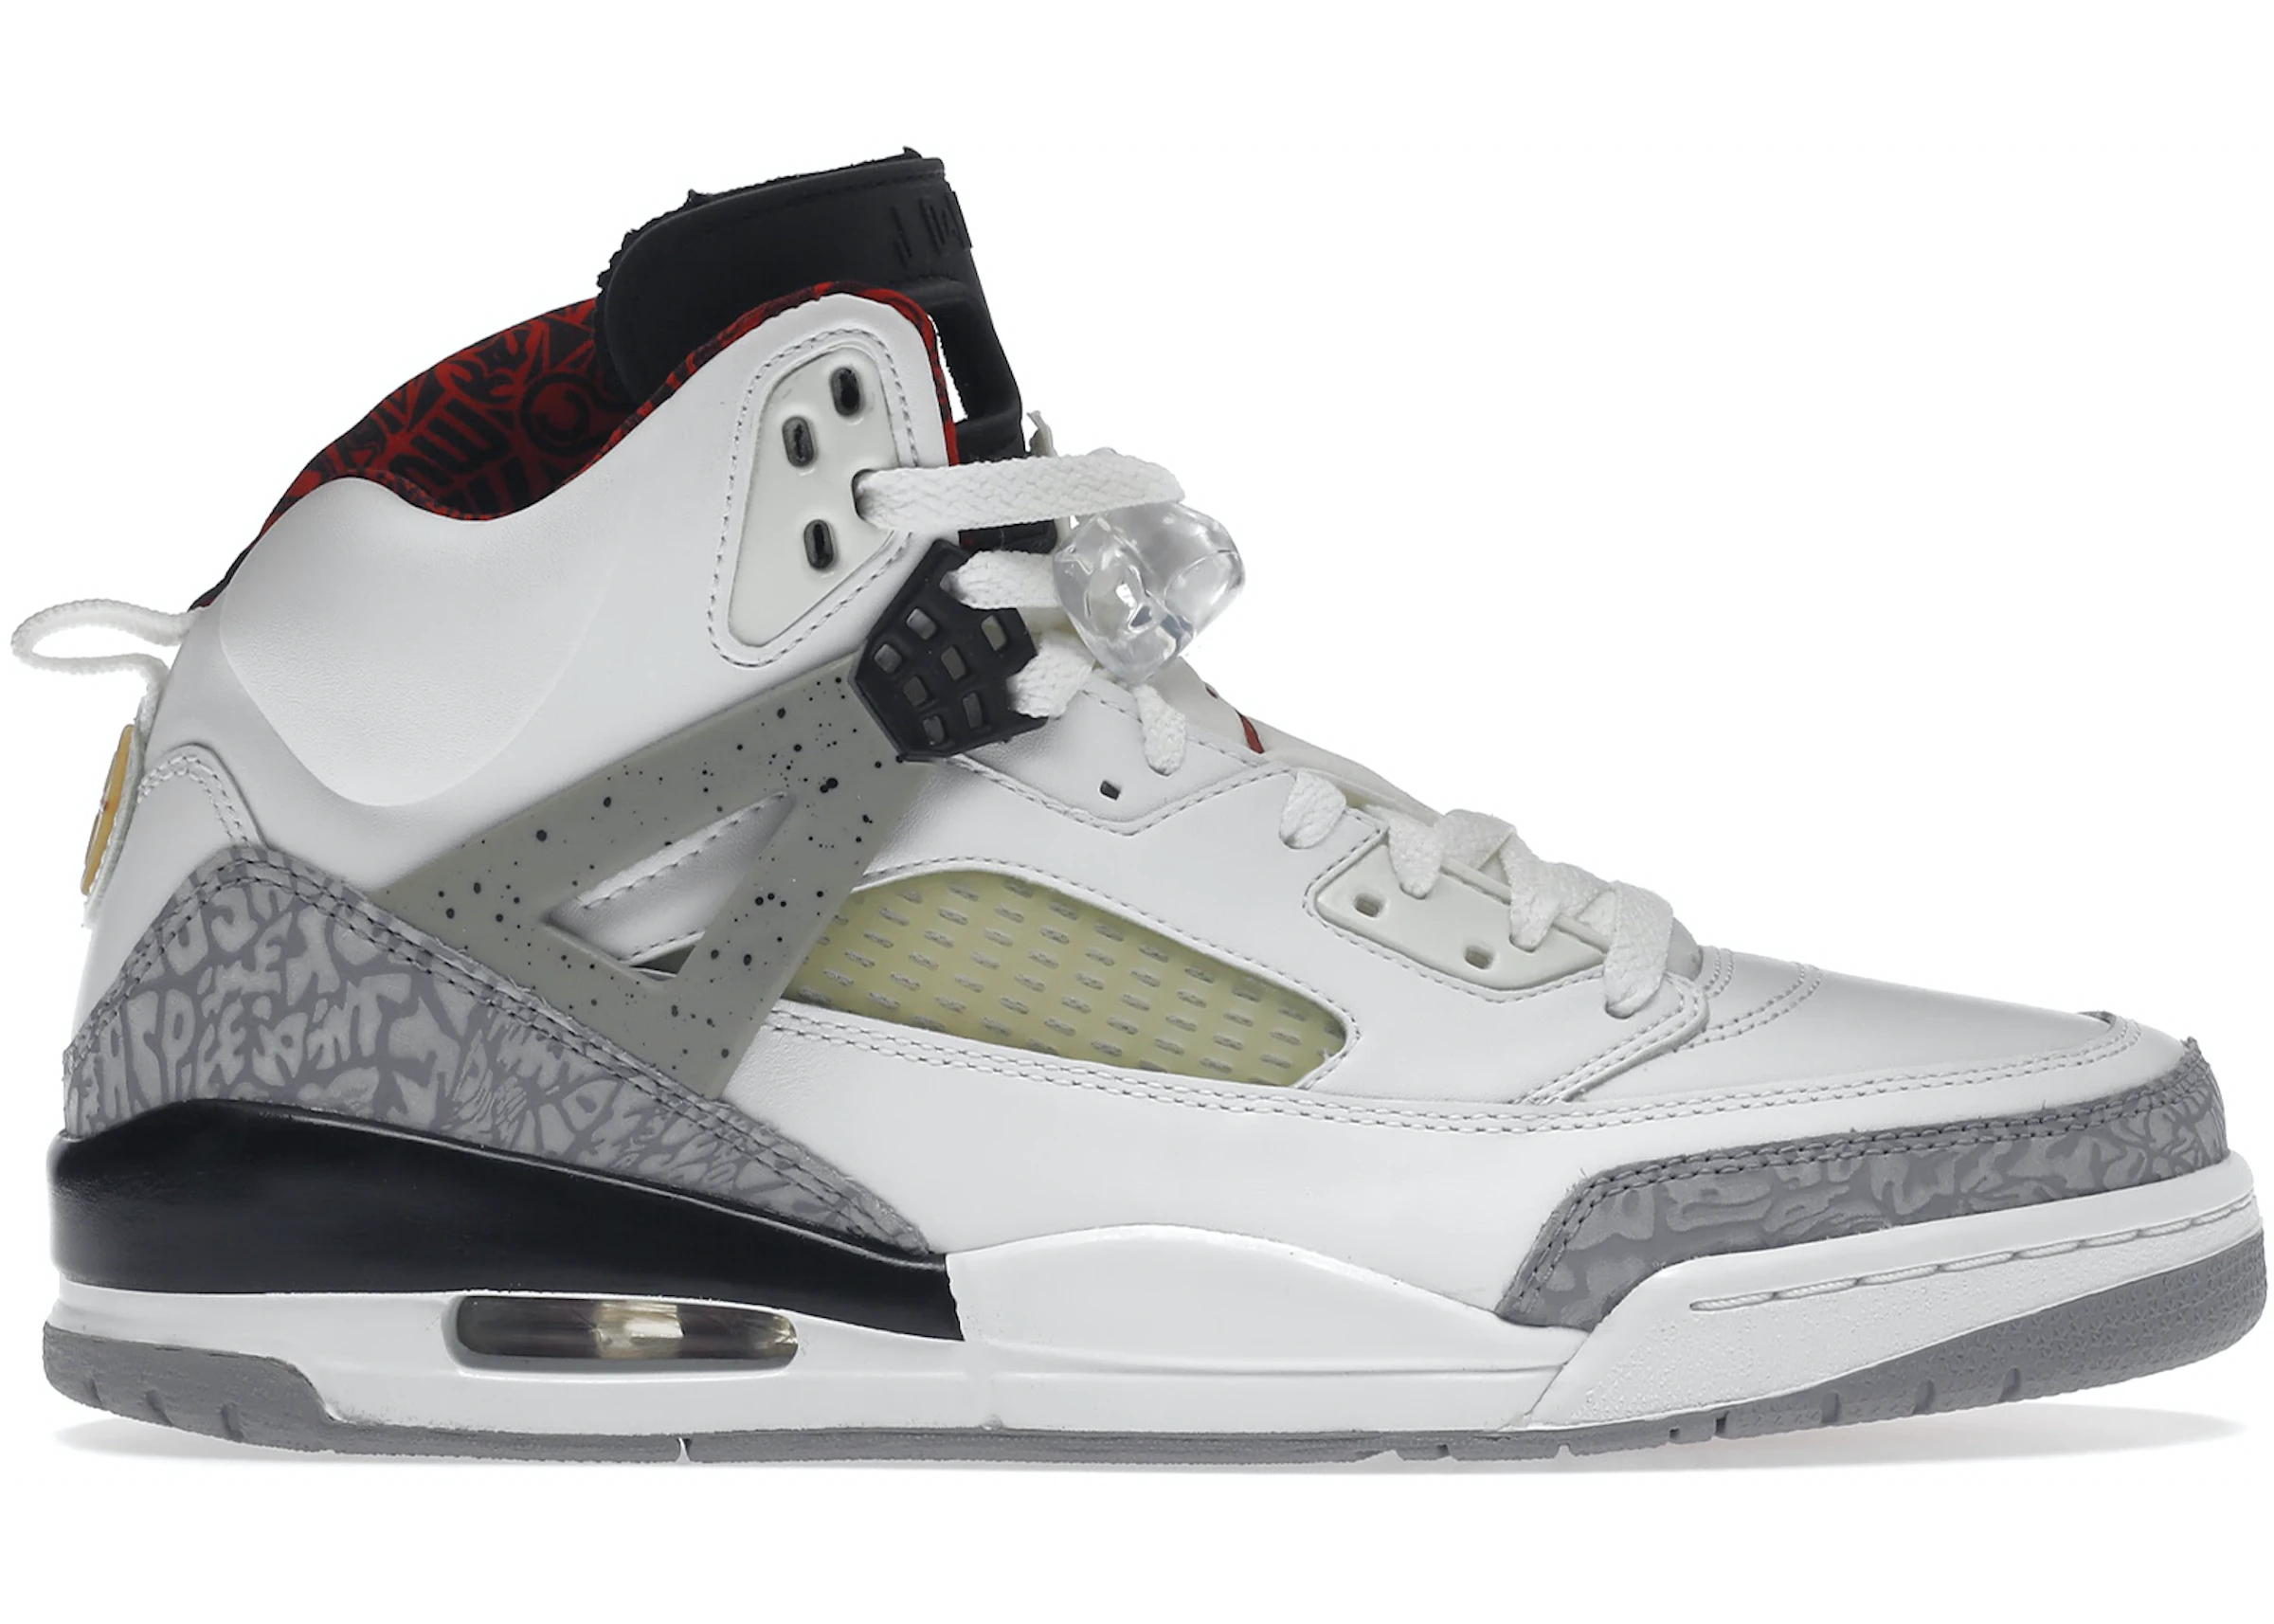 sell Parcel Peace of mind Jordan Spizike White Cement Grey - 315371-101 - US